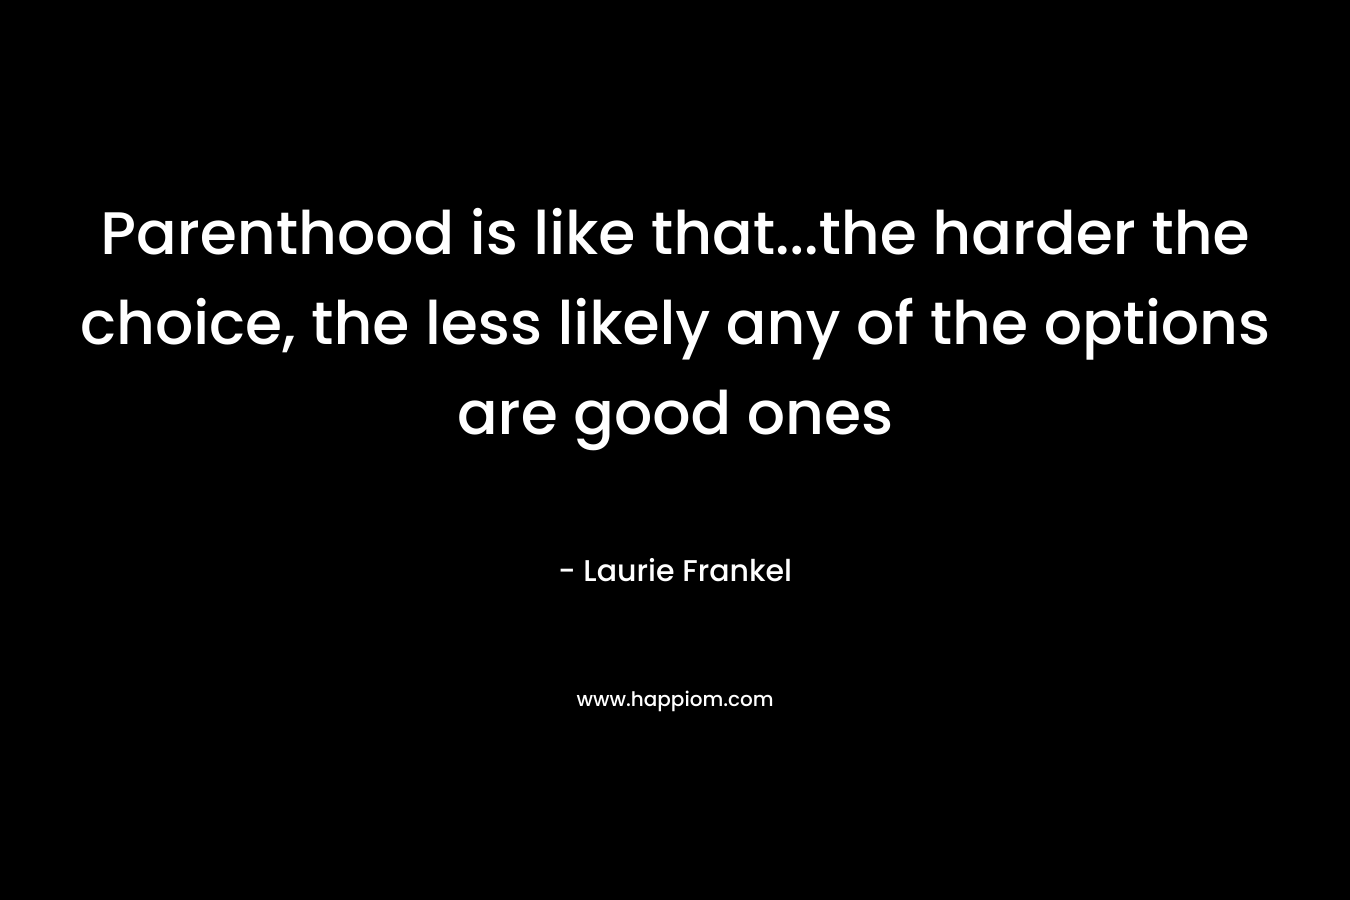 Parenthood is like that…the harder the choice, the less likely any of the options are good ones – Laurie Frankel